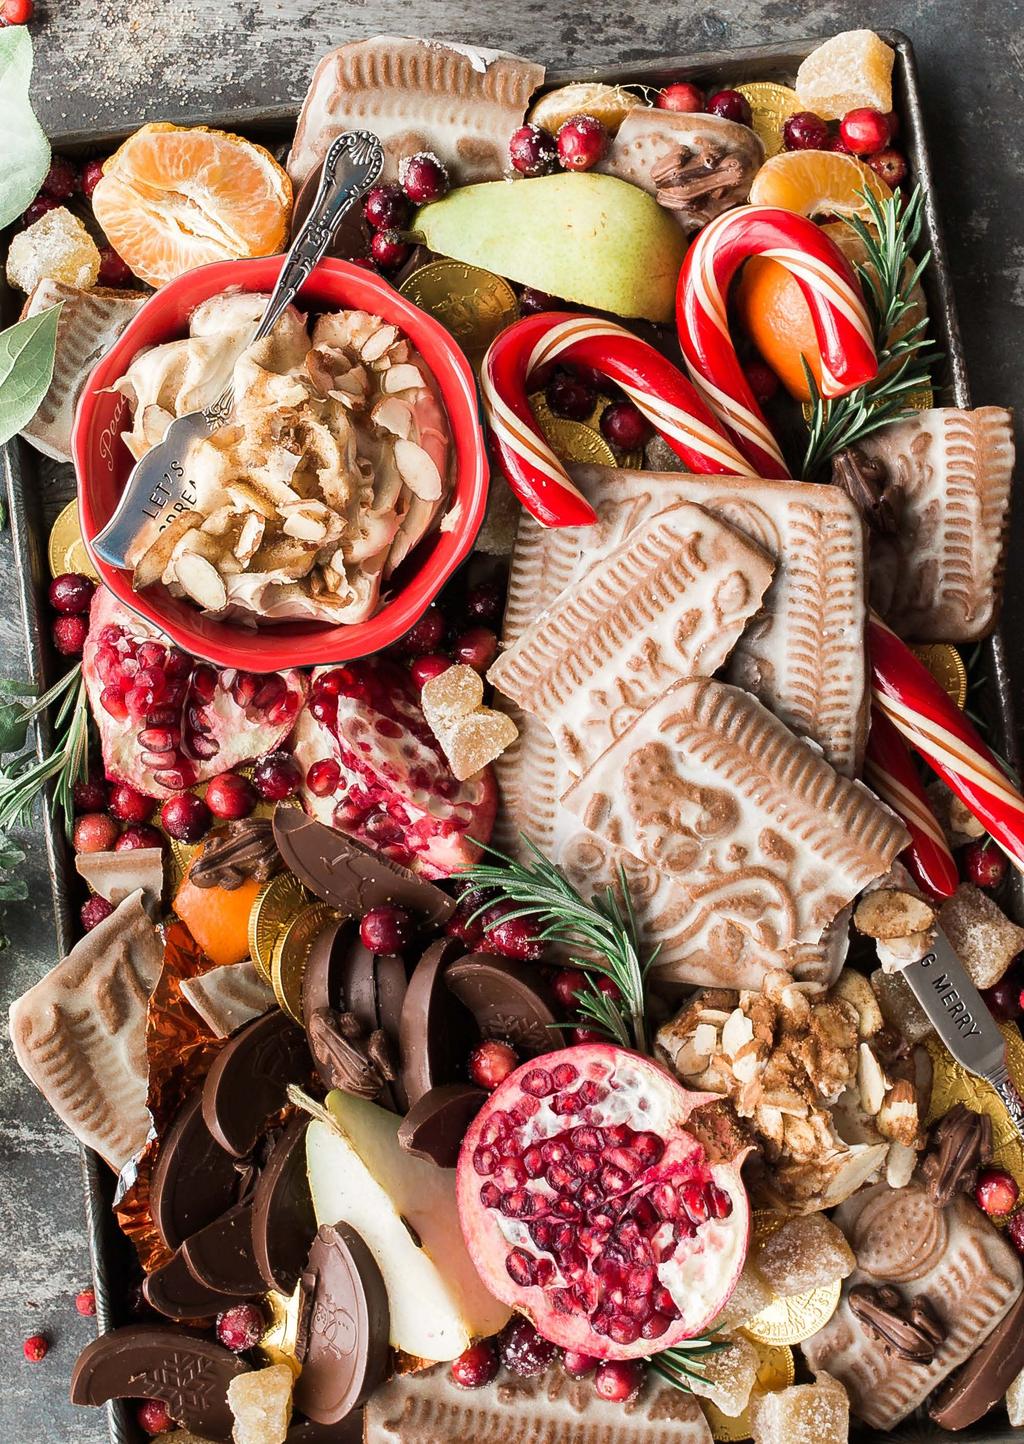 Holiday Sweets 8 Round Fudge Wreath $10 each Holiday Cookie Assortment $15 per dozen Choose from a chef assortment dozen or hand pick your own cookies by the dozen: Chocolate Crinkle Molasses Crackle